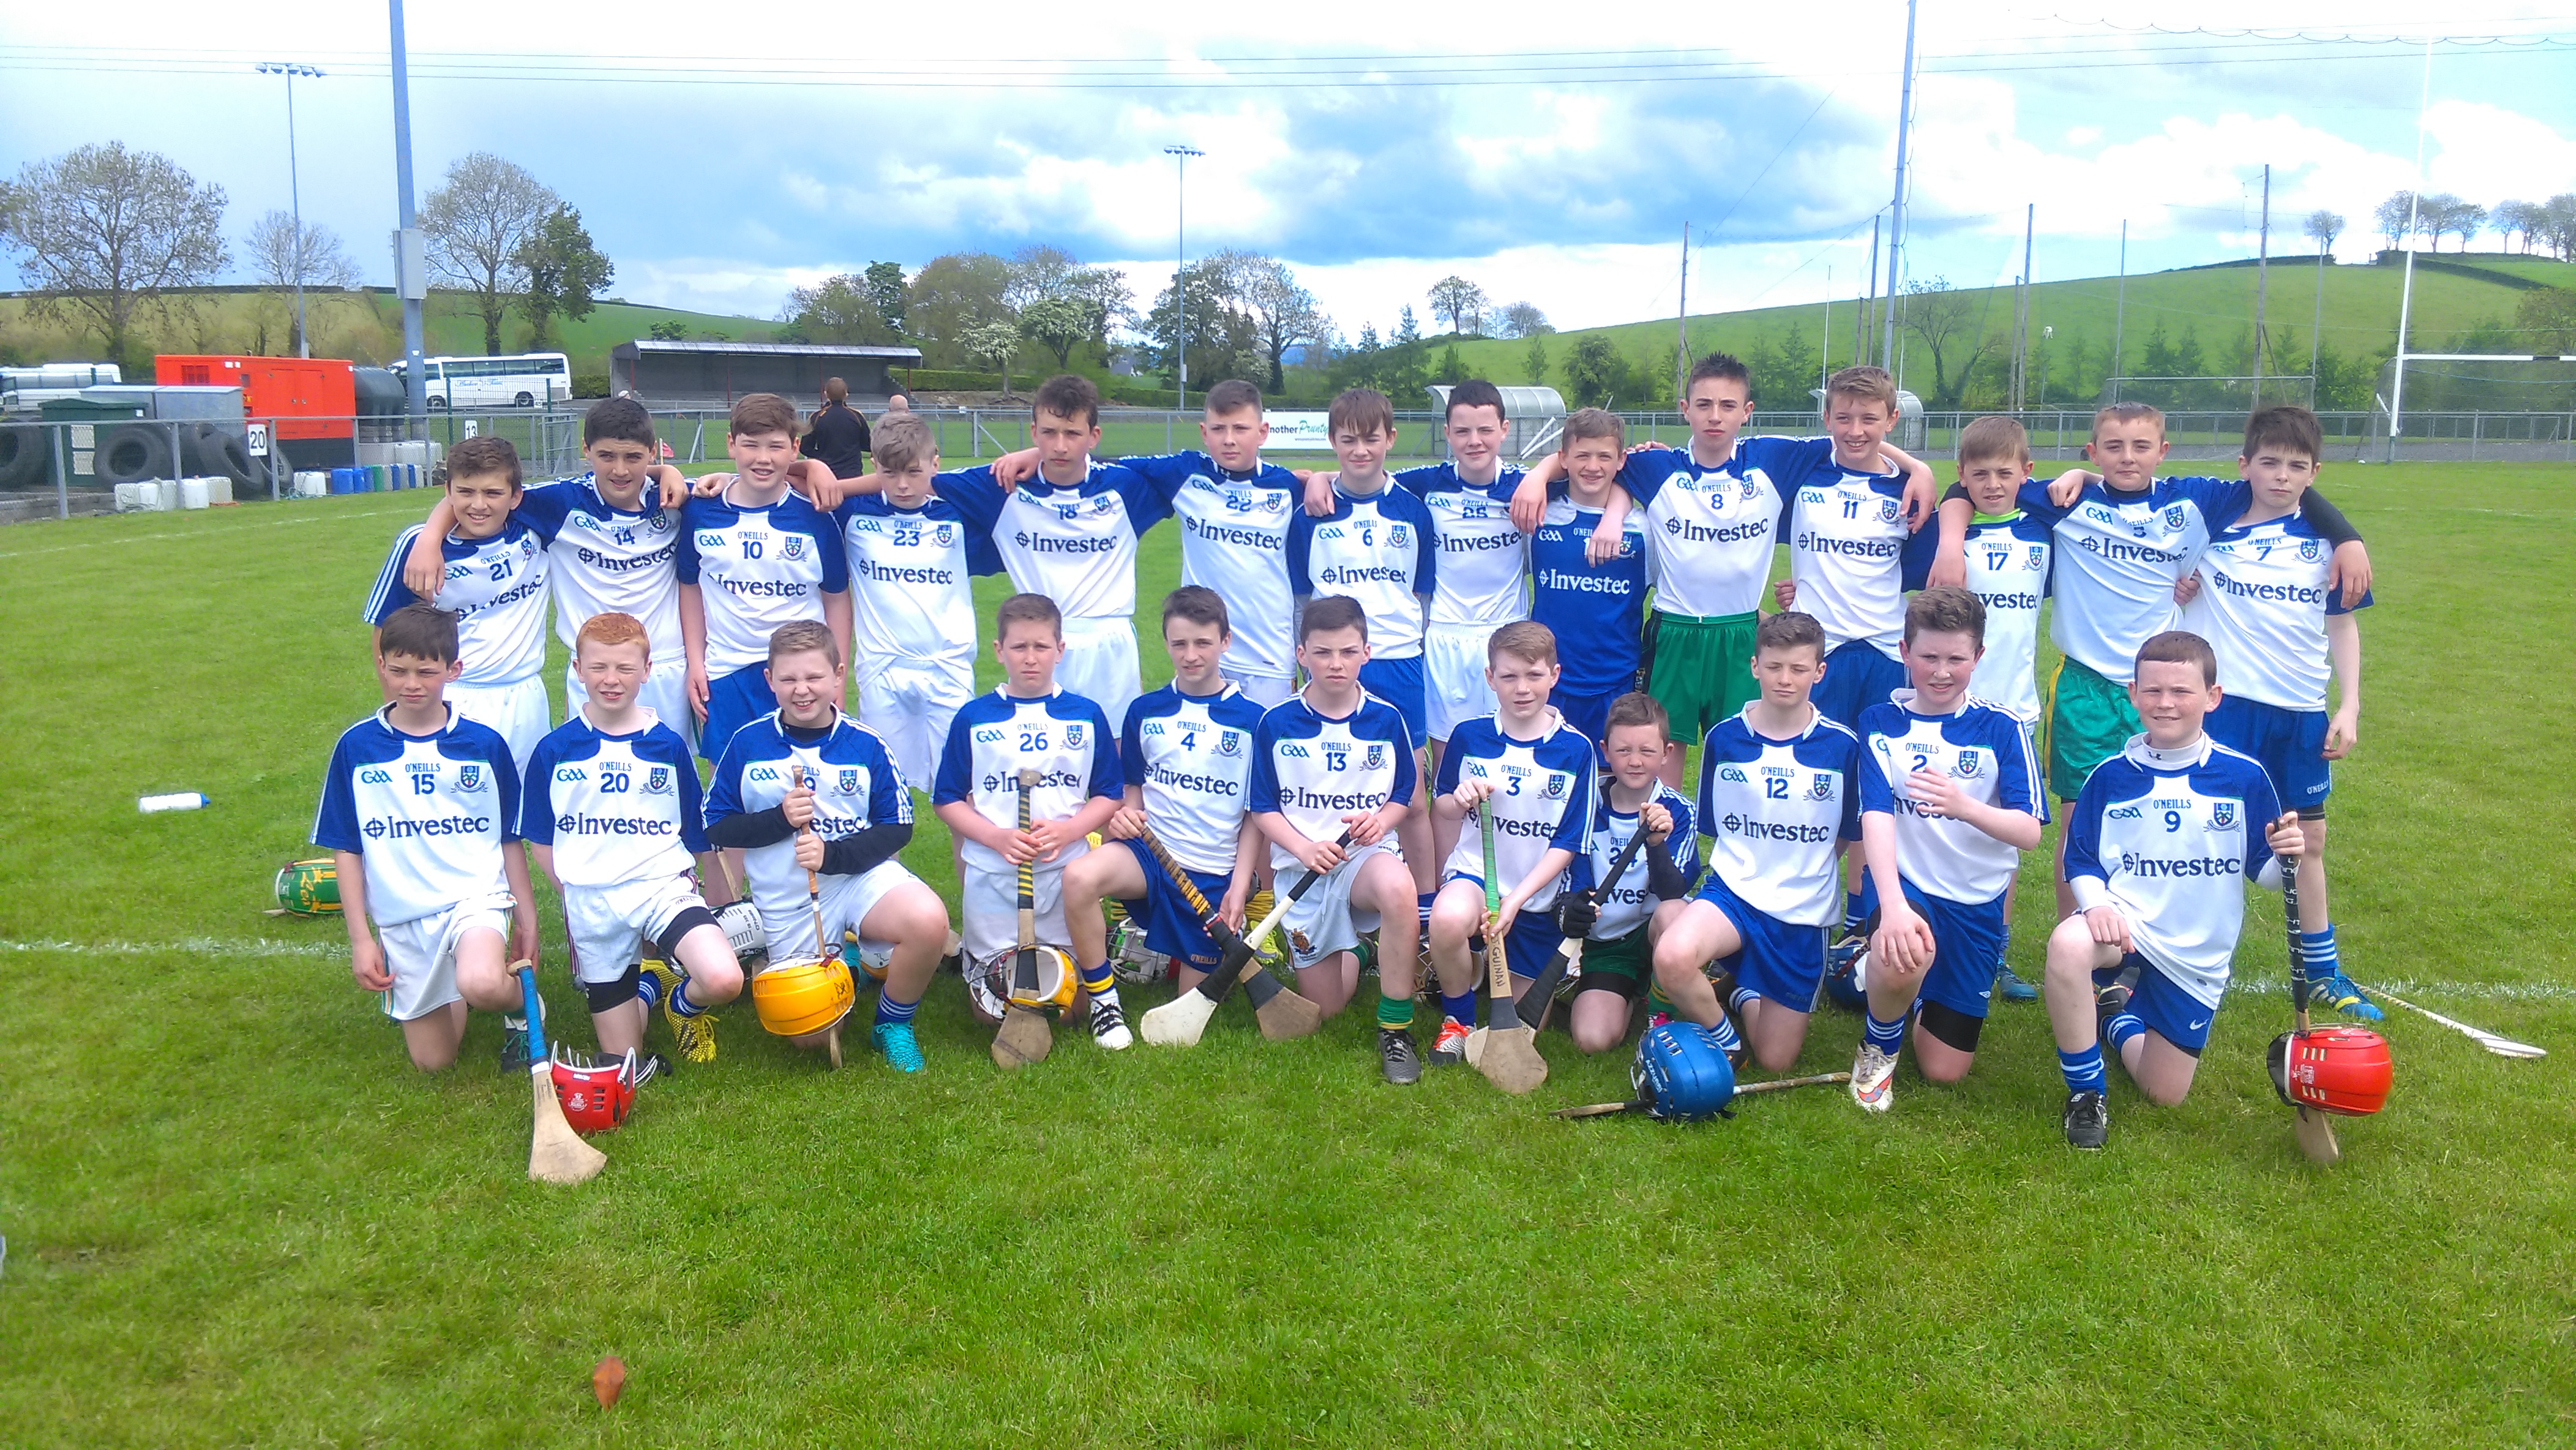 Monaghan Under 14 Hurling Development Squad have their first outing of the year